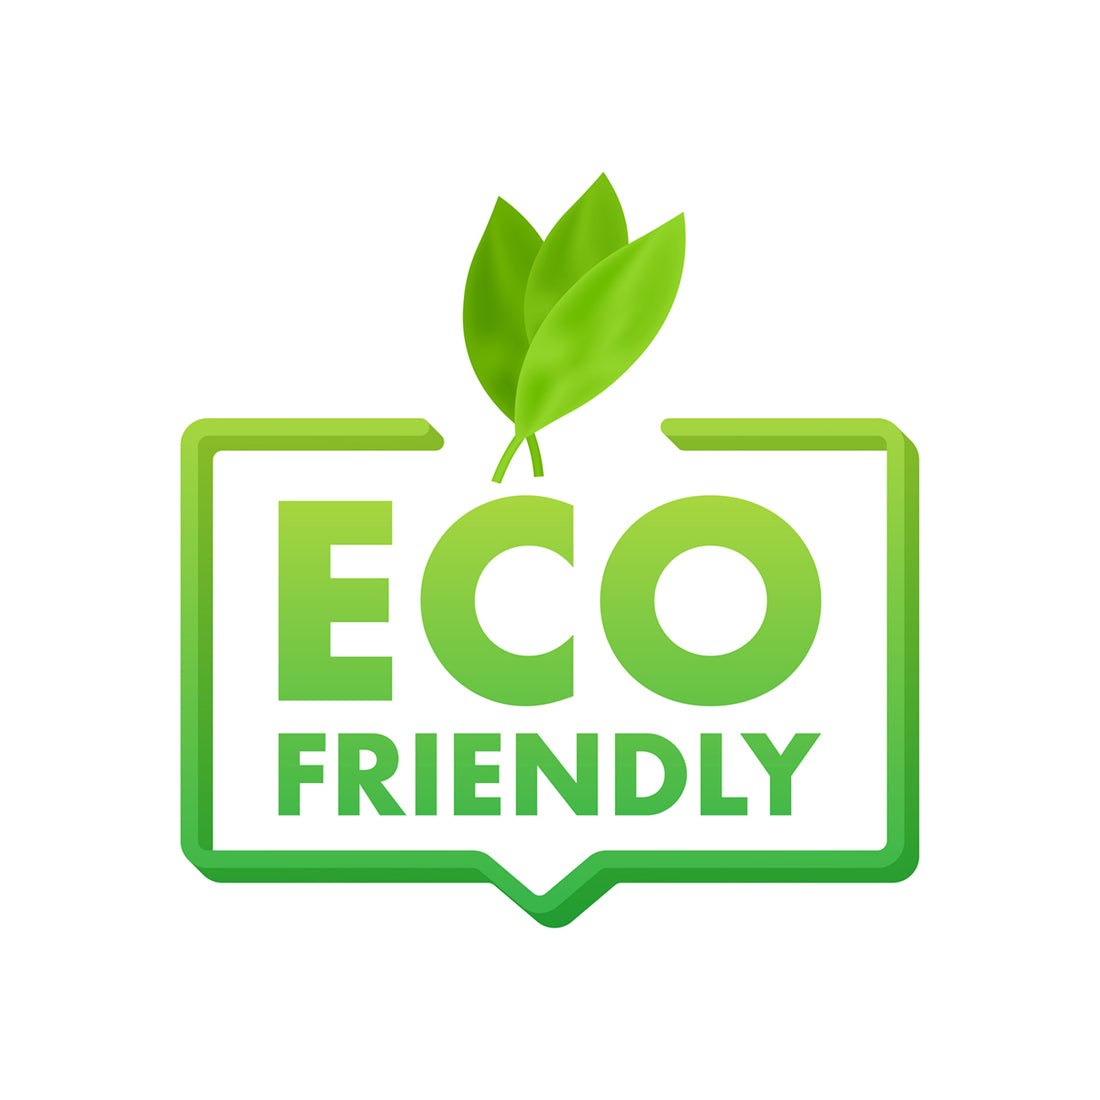 Our Eco Friendly Mission